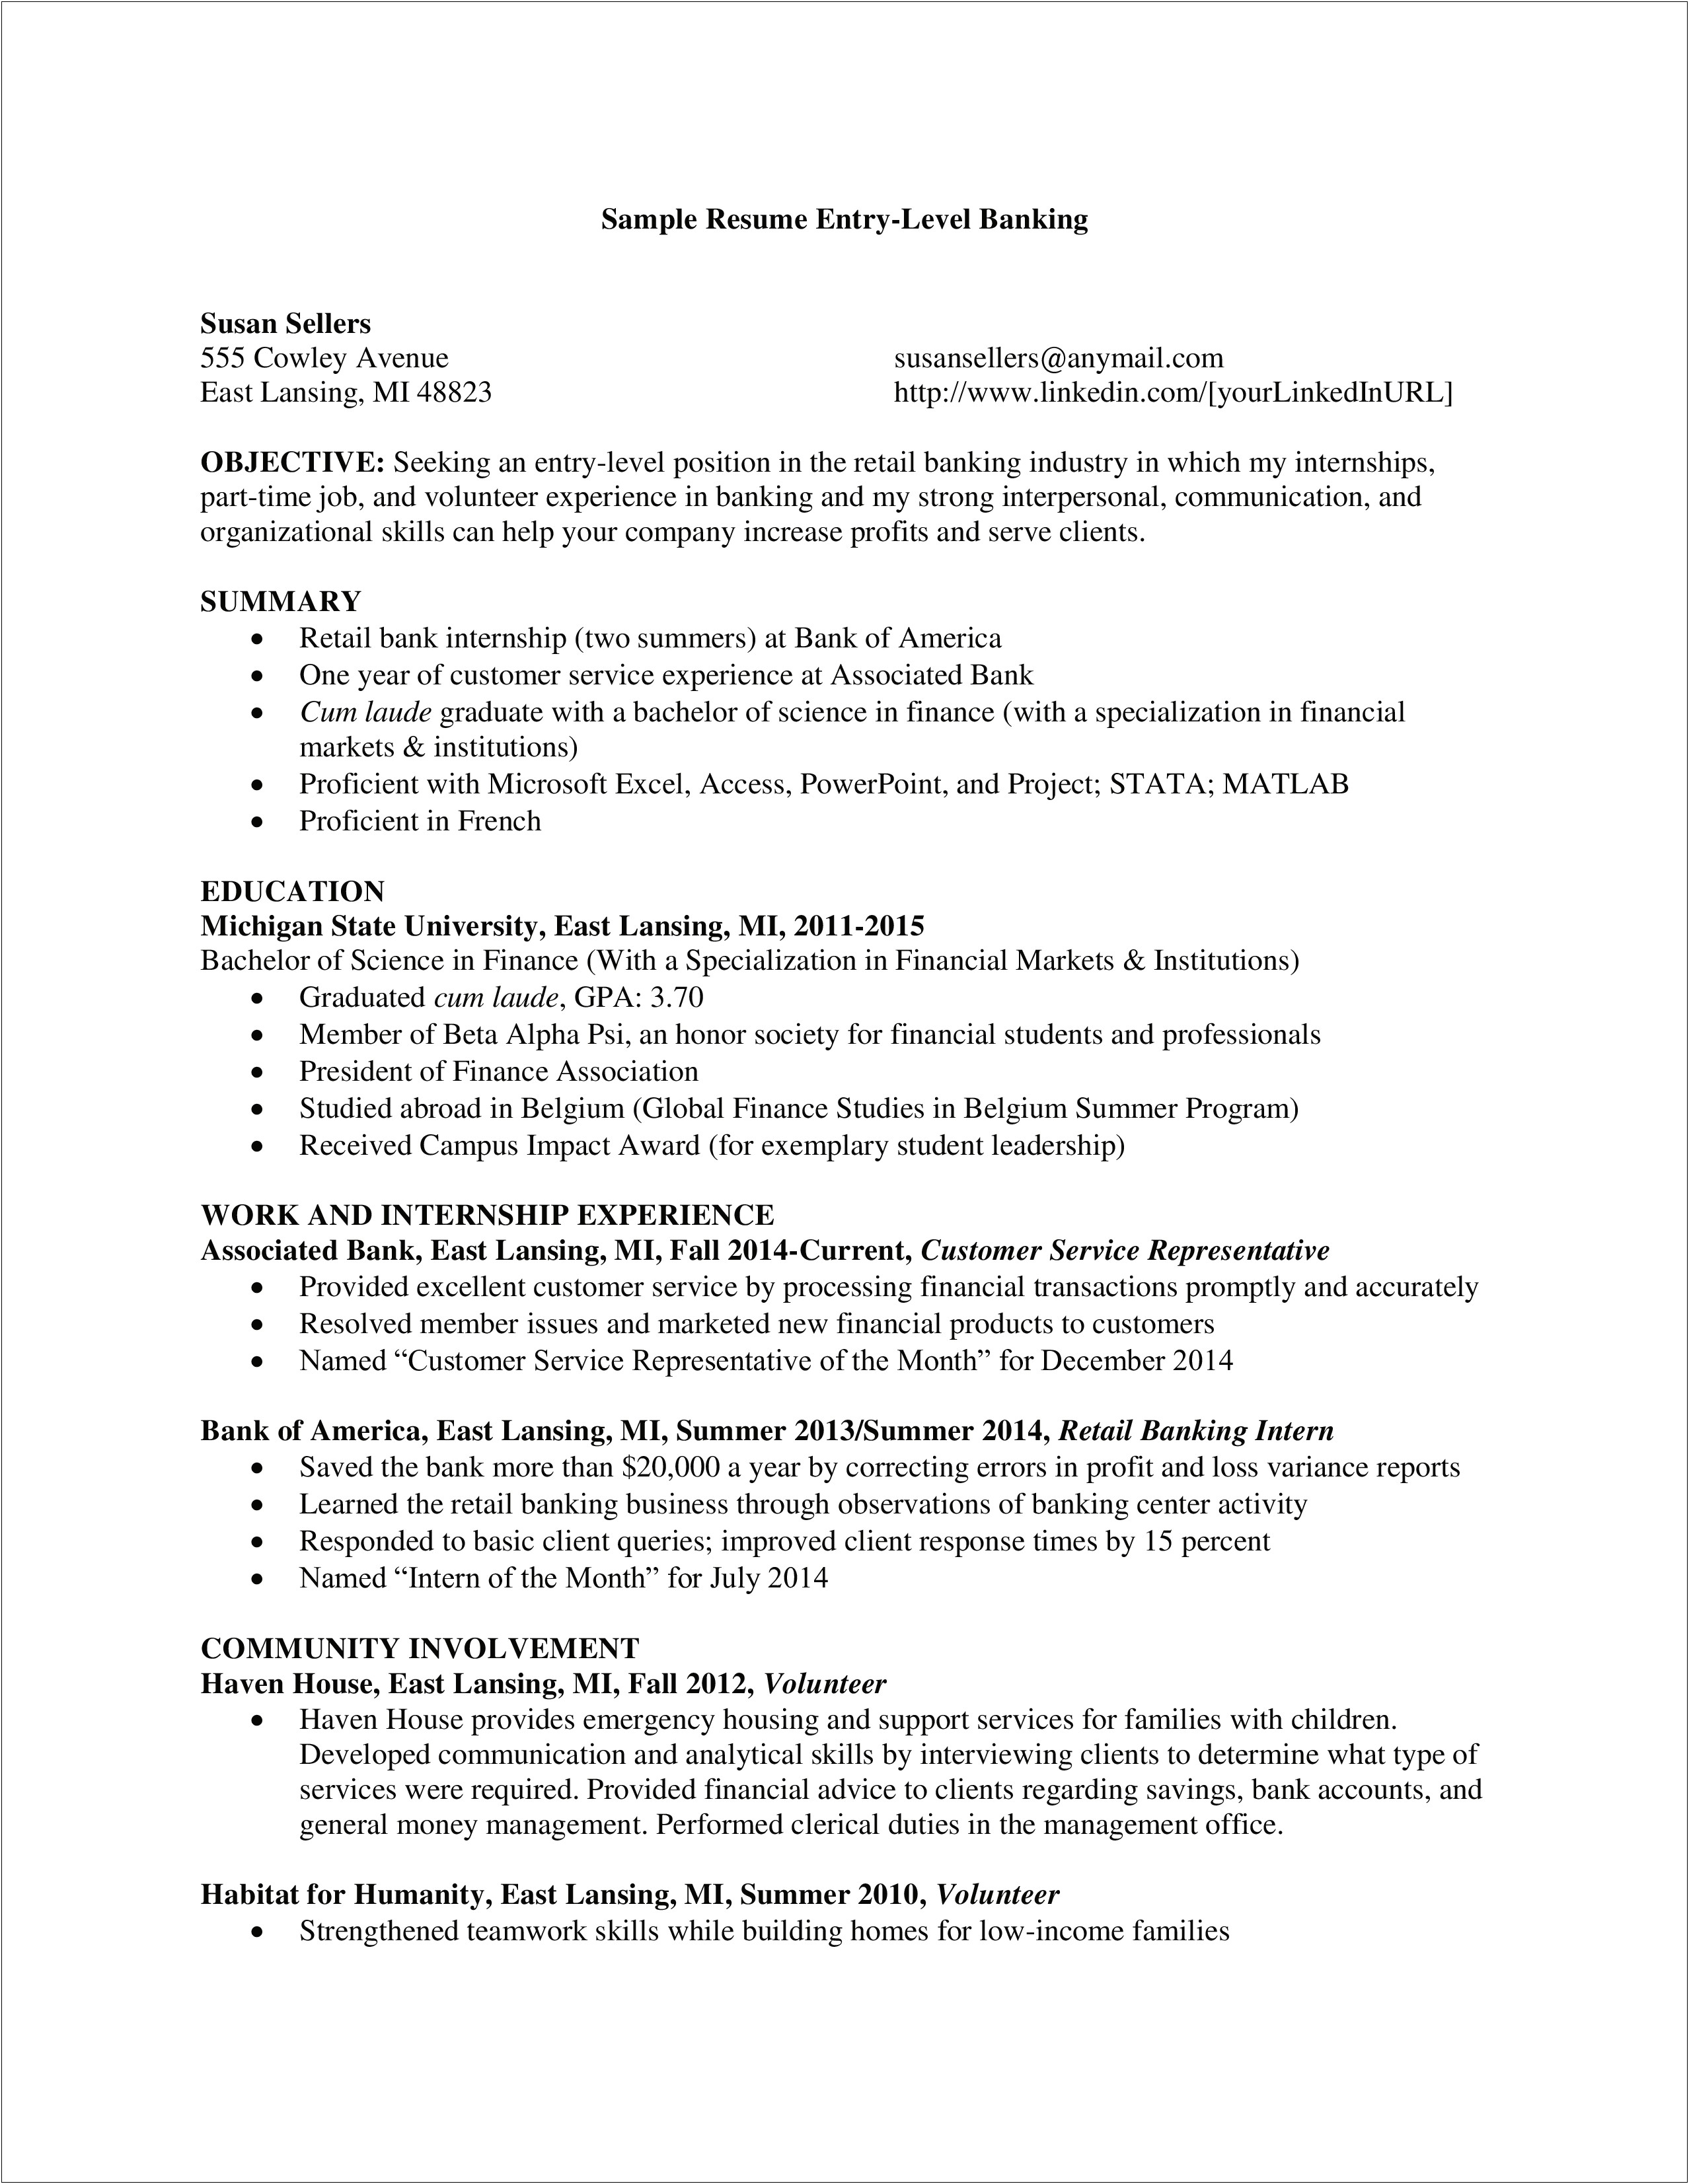 Resume For Bank Of America Jobs